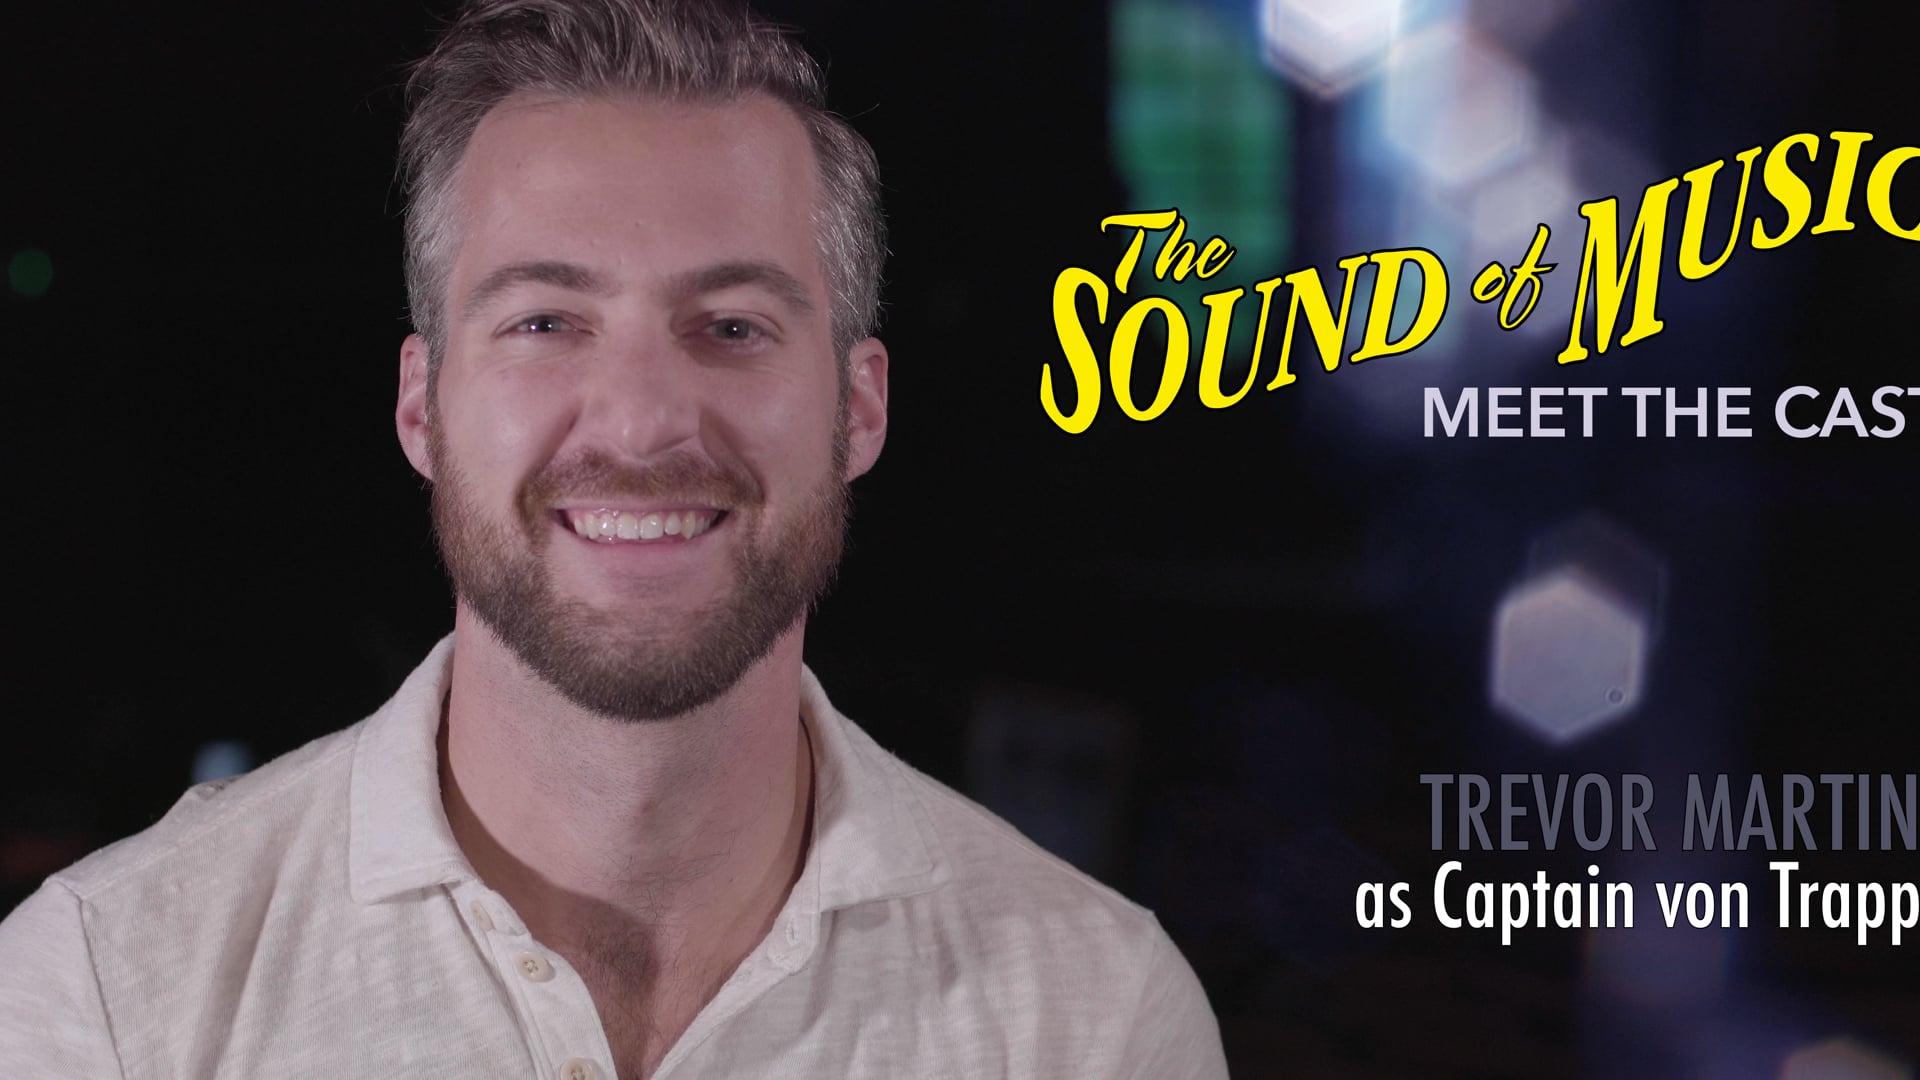 Meet the Cast of "The Sound of Music" (Trevor Martin as Captain von Trapp)